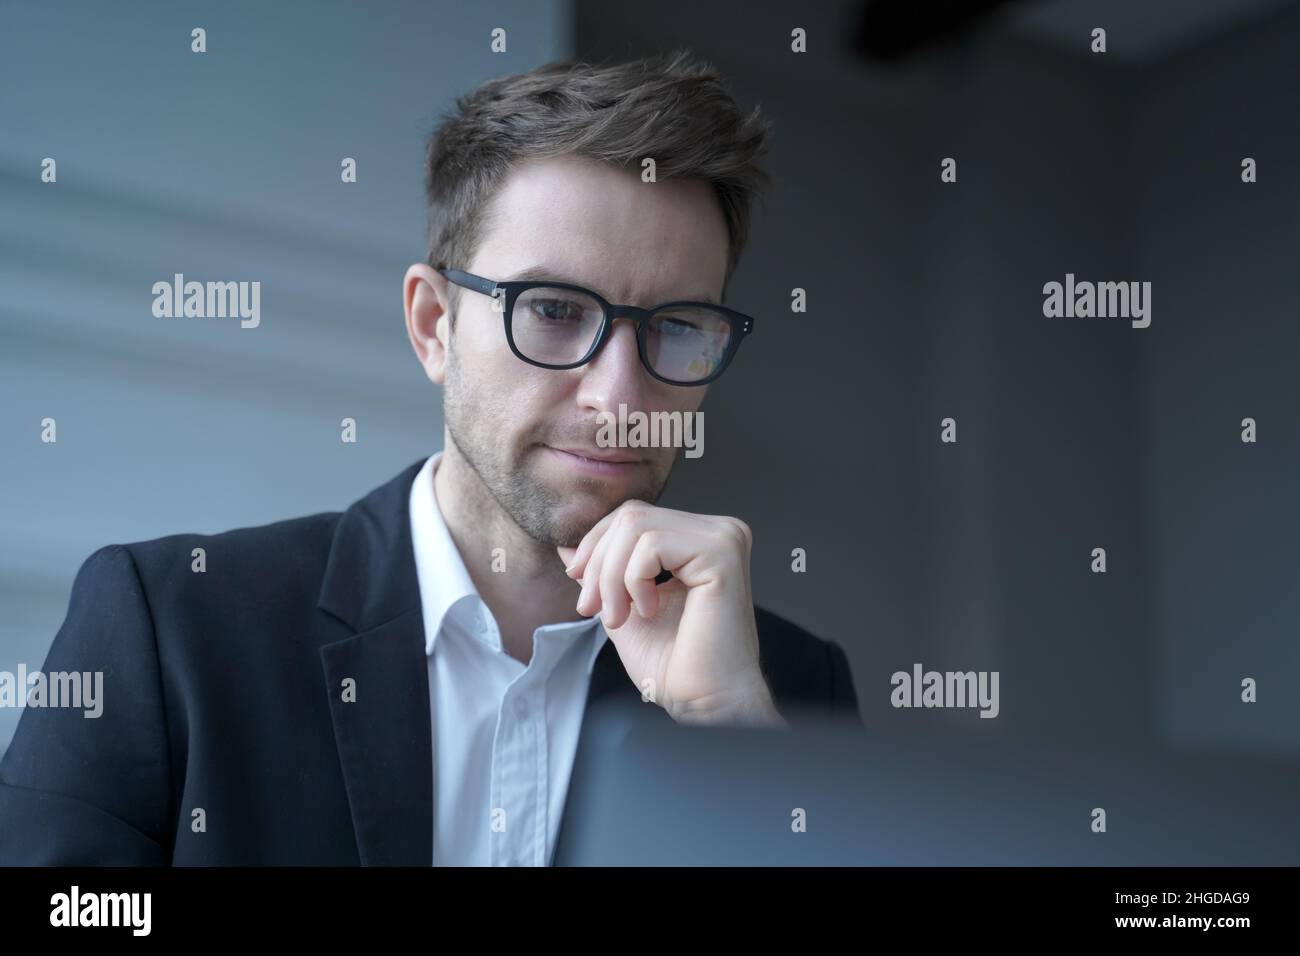 Focused German man family lawyer in formal wear thoughtfully looking at computer monitor Stock Photo